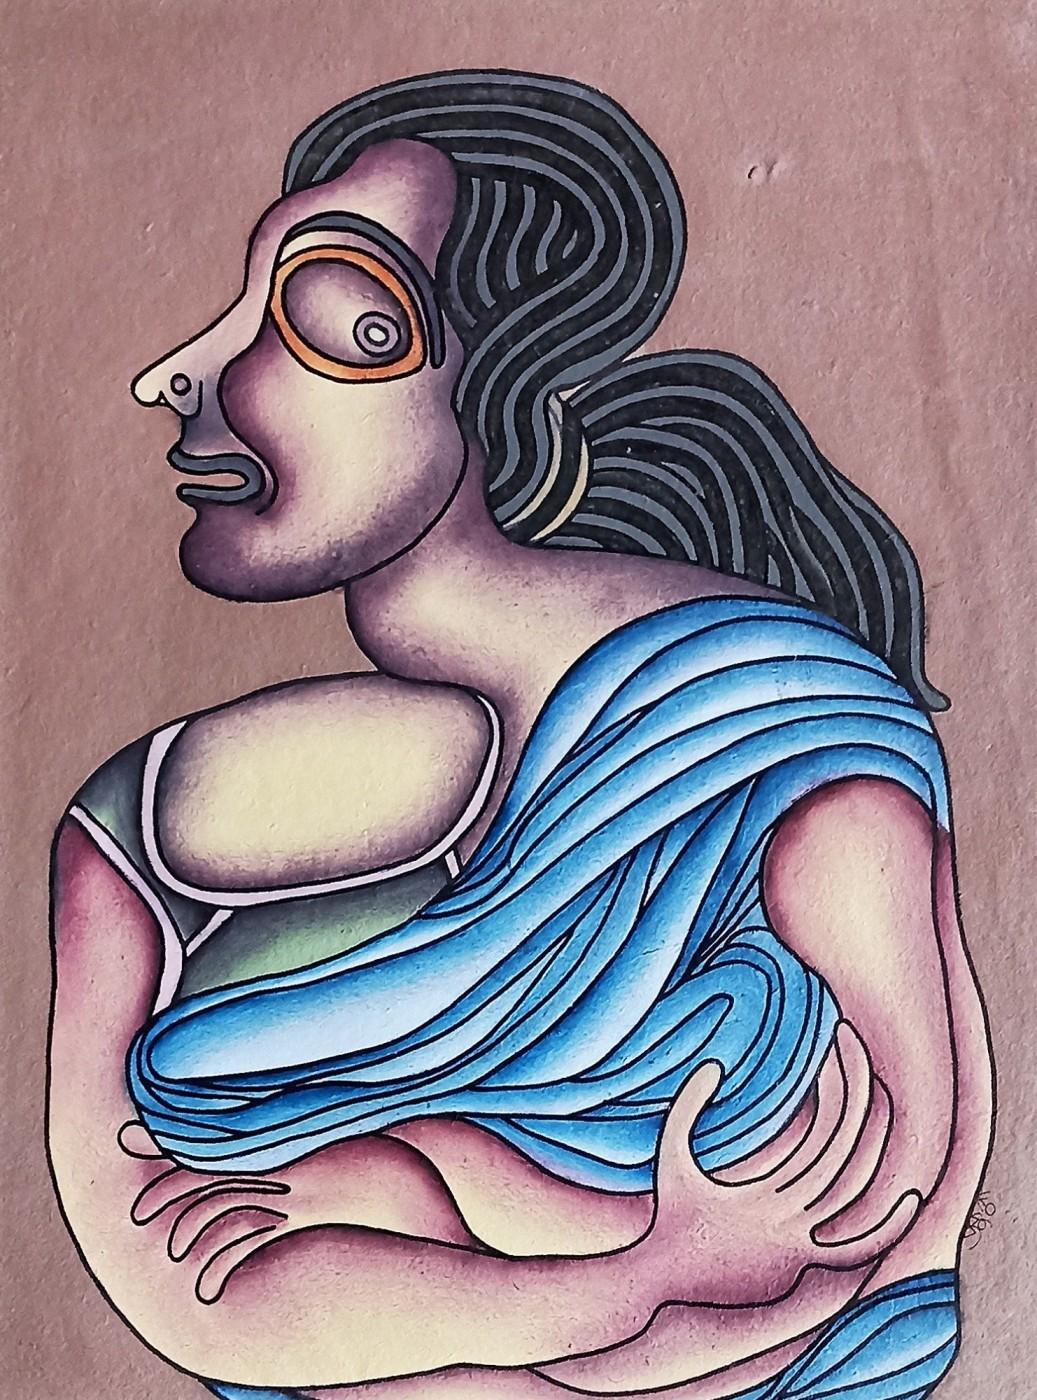 Prokash Karmakar
Untitled
Acrylic on Paper
28 x 20 inches    71.1 x 50.8 cm
1990
( Framed & Delivered )

Karmakar is best known for his landscapes and nudes, which are generally painted in vibrant colors with bold lines and intricate textures. His